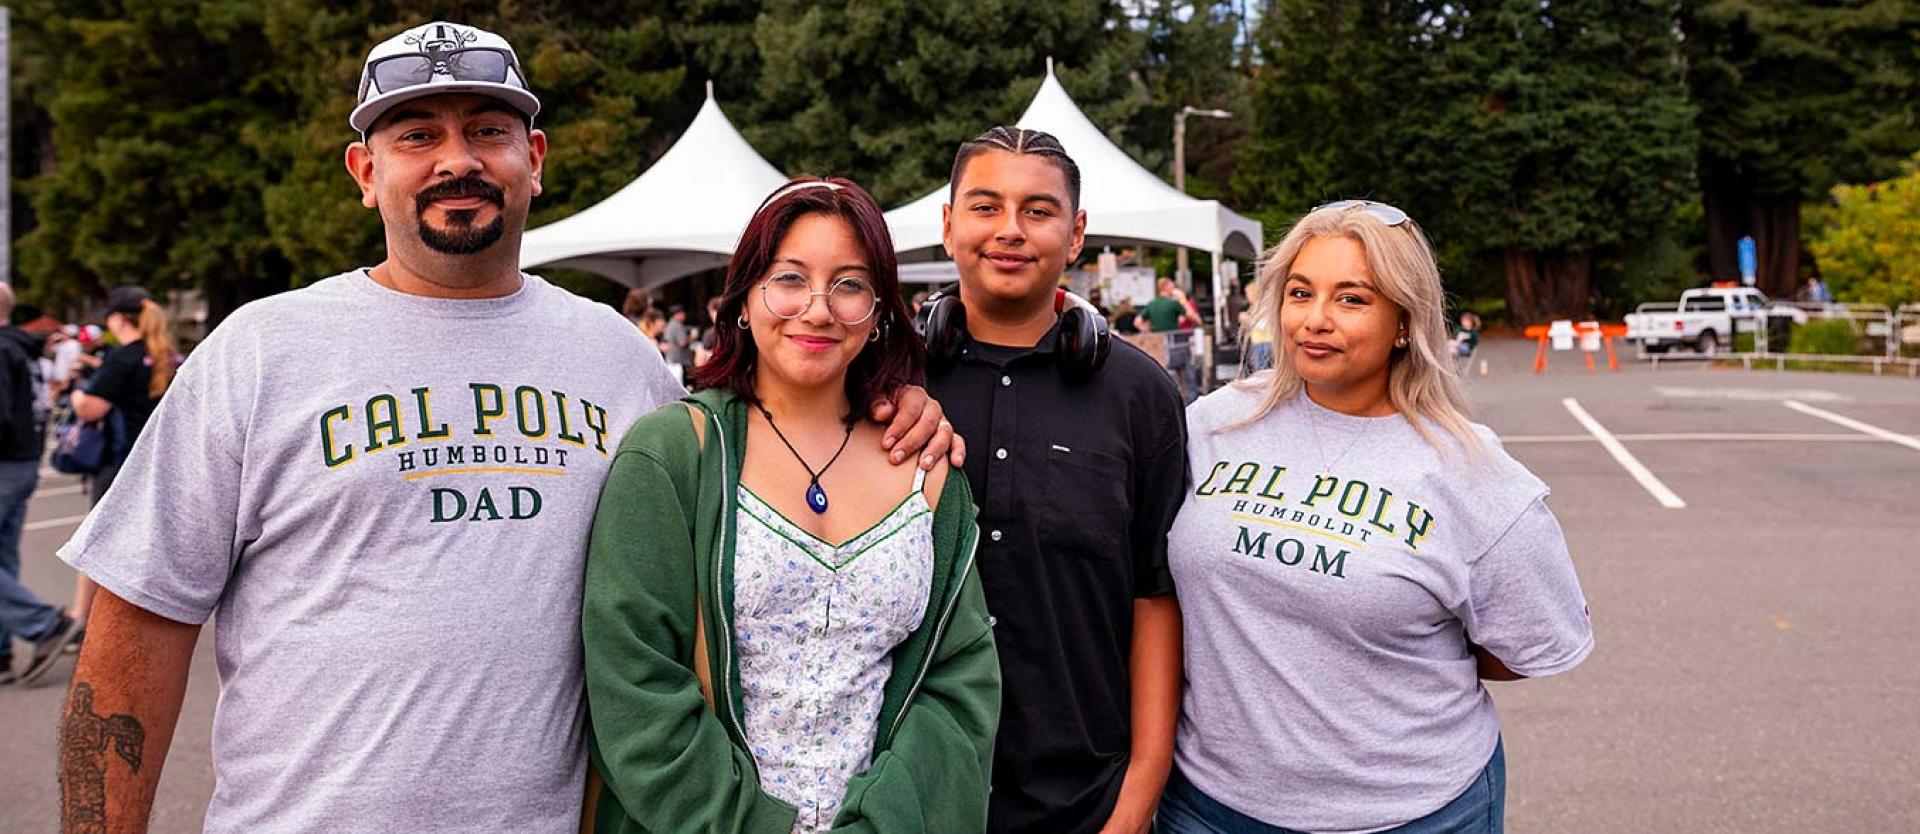 Family with Cal Poly Humboldt shirts